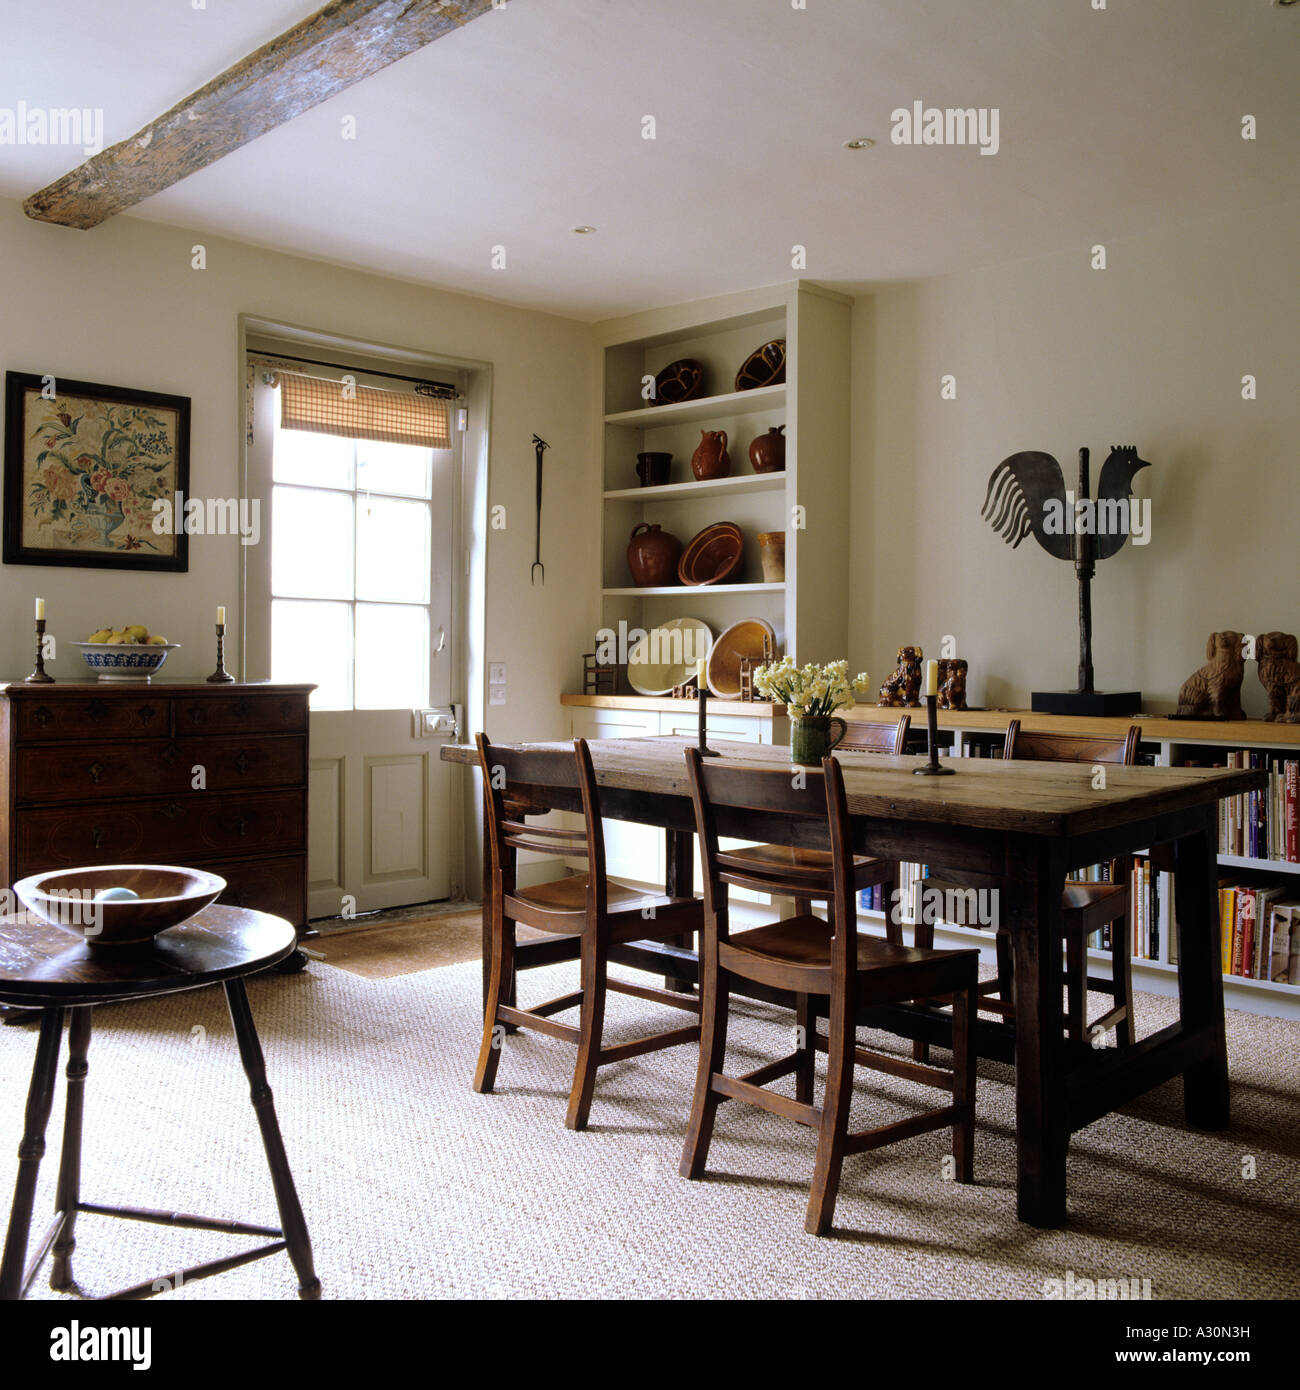 Wooden dining room table and beamed ceiling Stock Photo